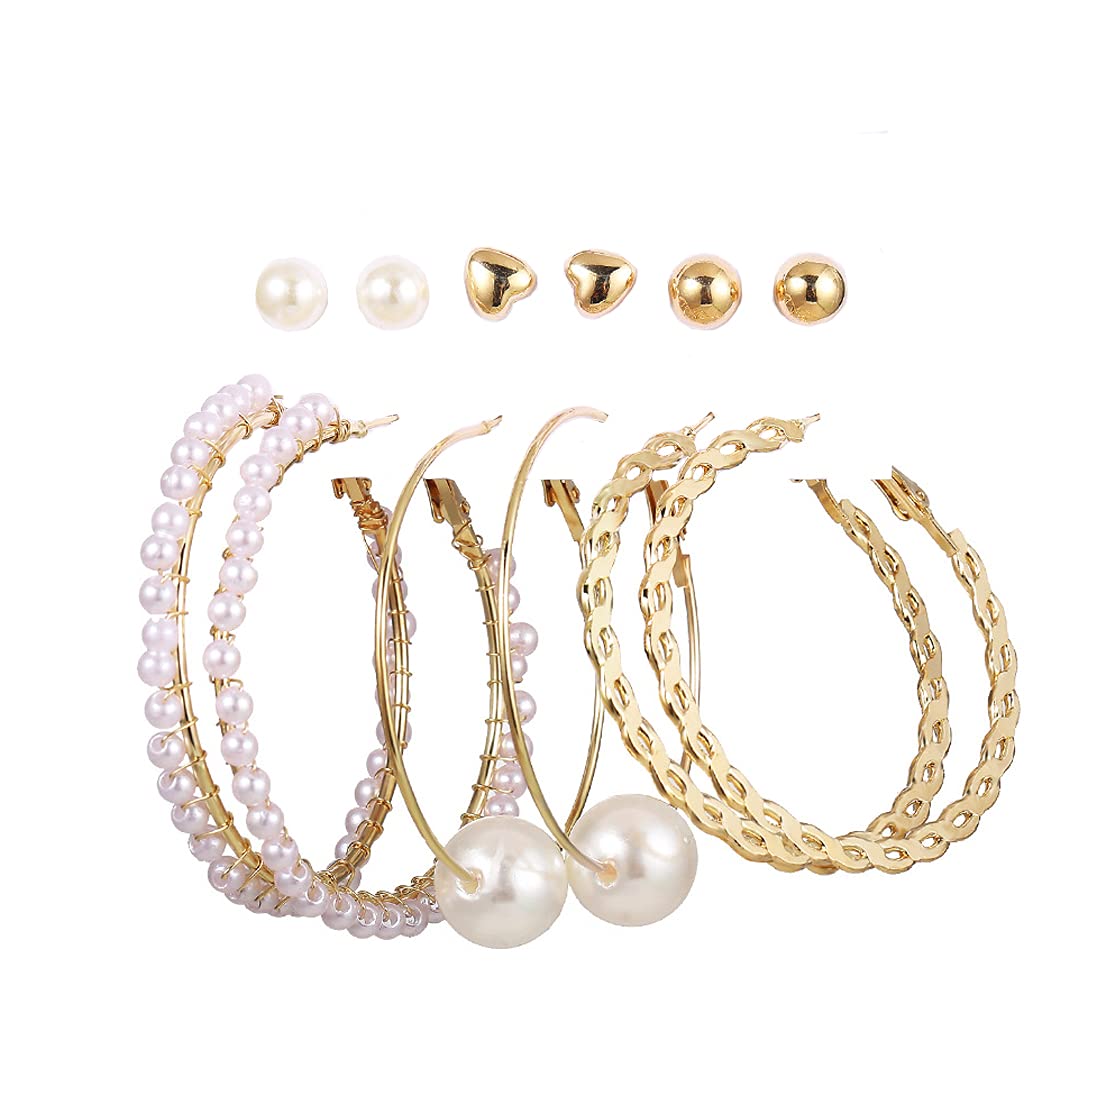 Kairangi Earrings for Women and Girls Fashion White Pearl Hoops Set | Gold Plated Combo of 6 Pairs Stud Hoop Earring Set | Birthday Gift for girls and women Anniversary Gift for Wife